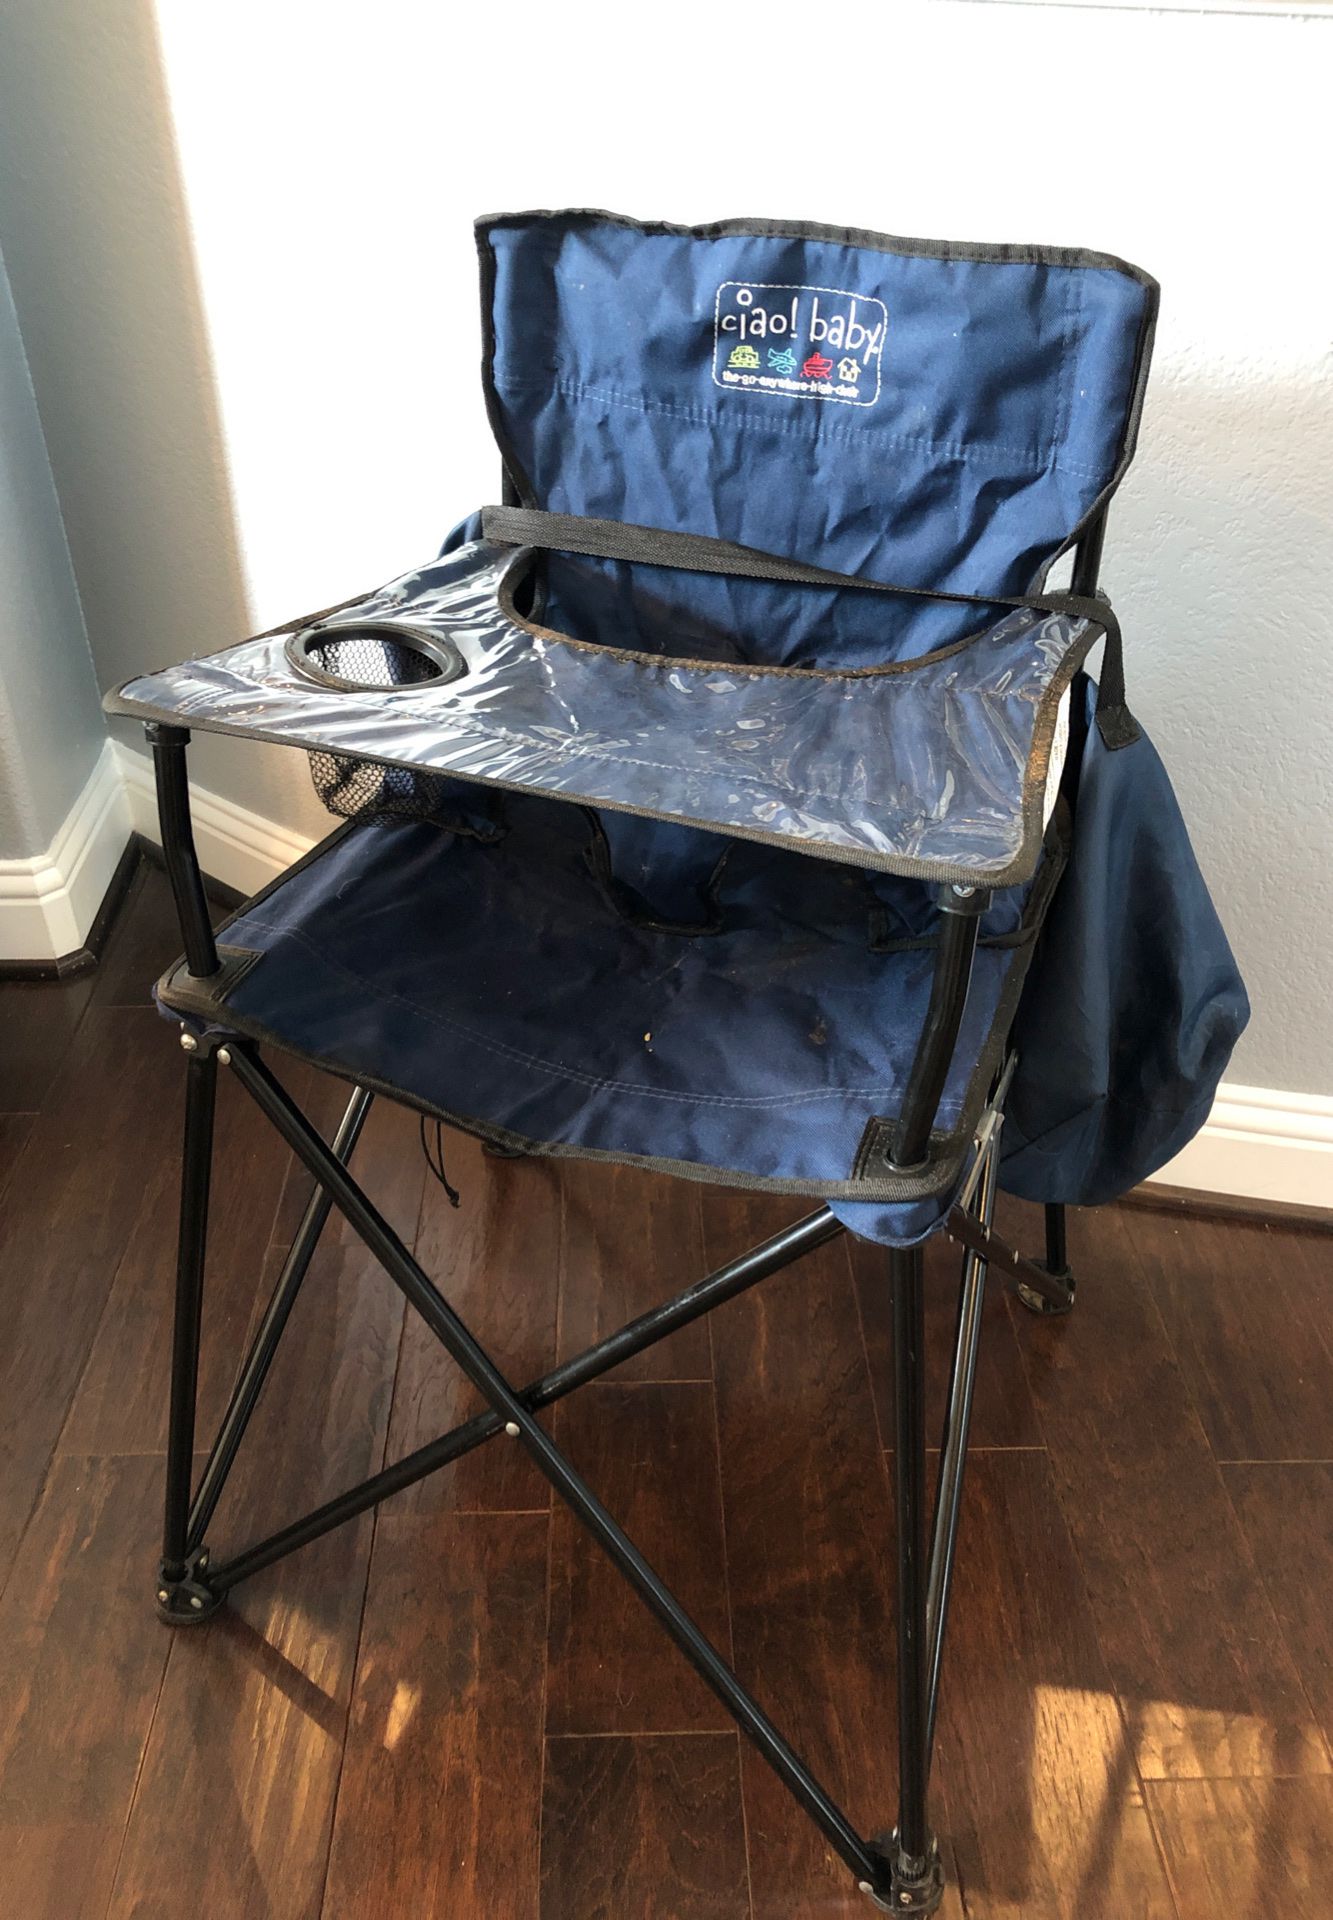 Ciao baby travel high chair